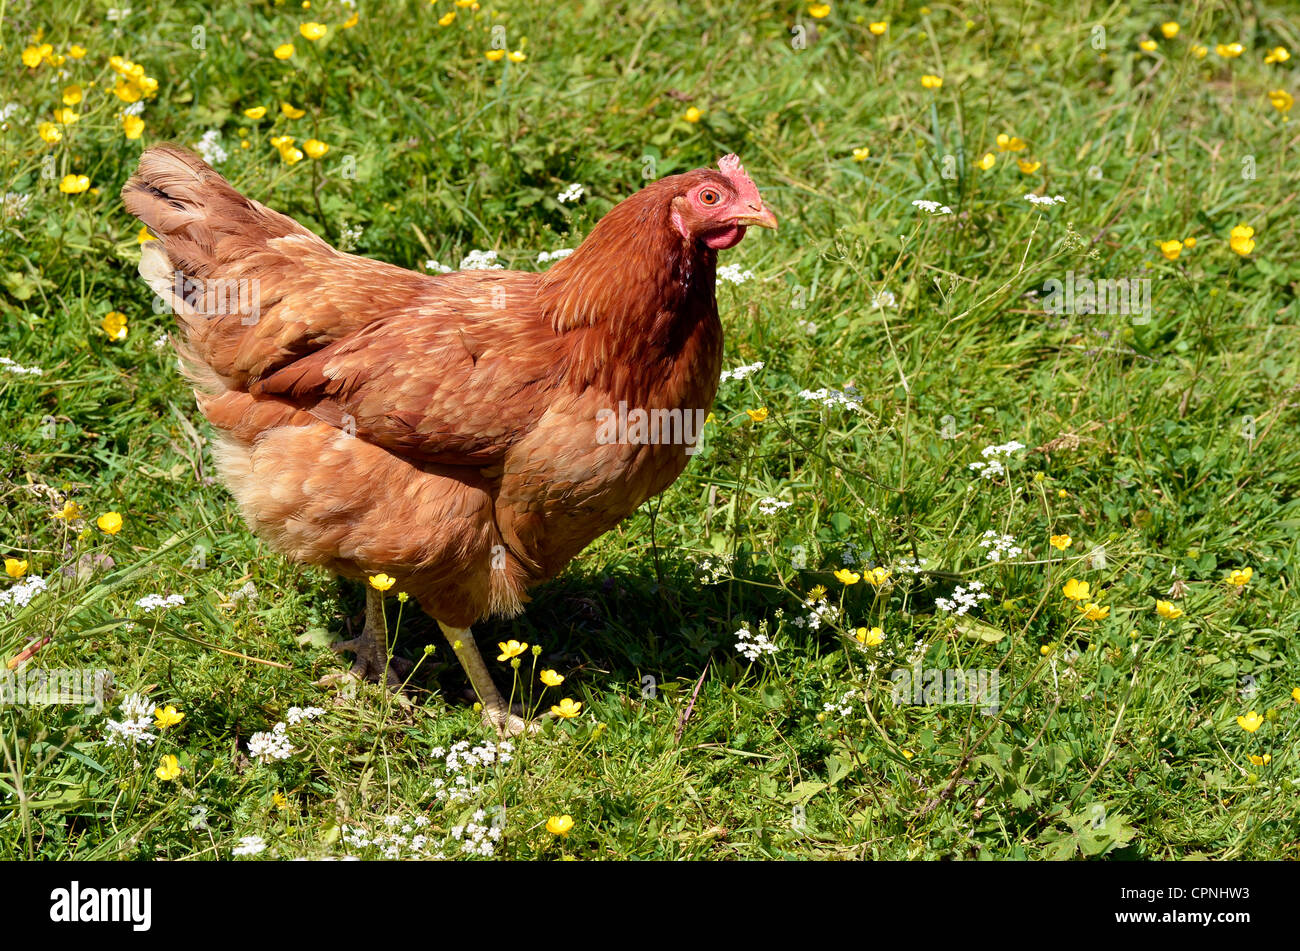 Brown hen (Gallus) walking on grass with numerous flowers Stock Photo